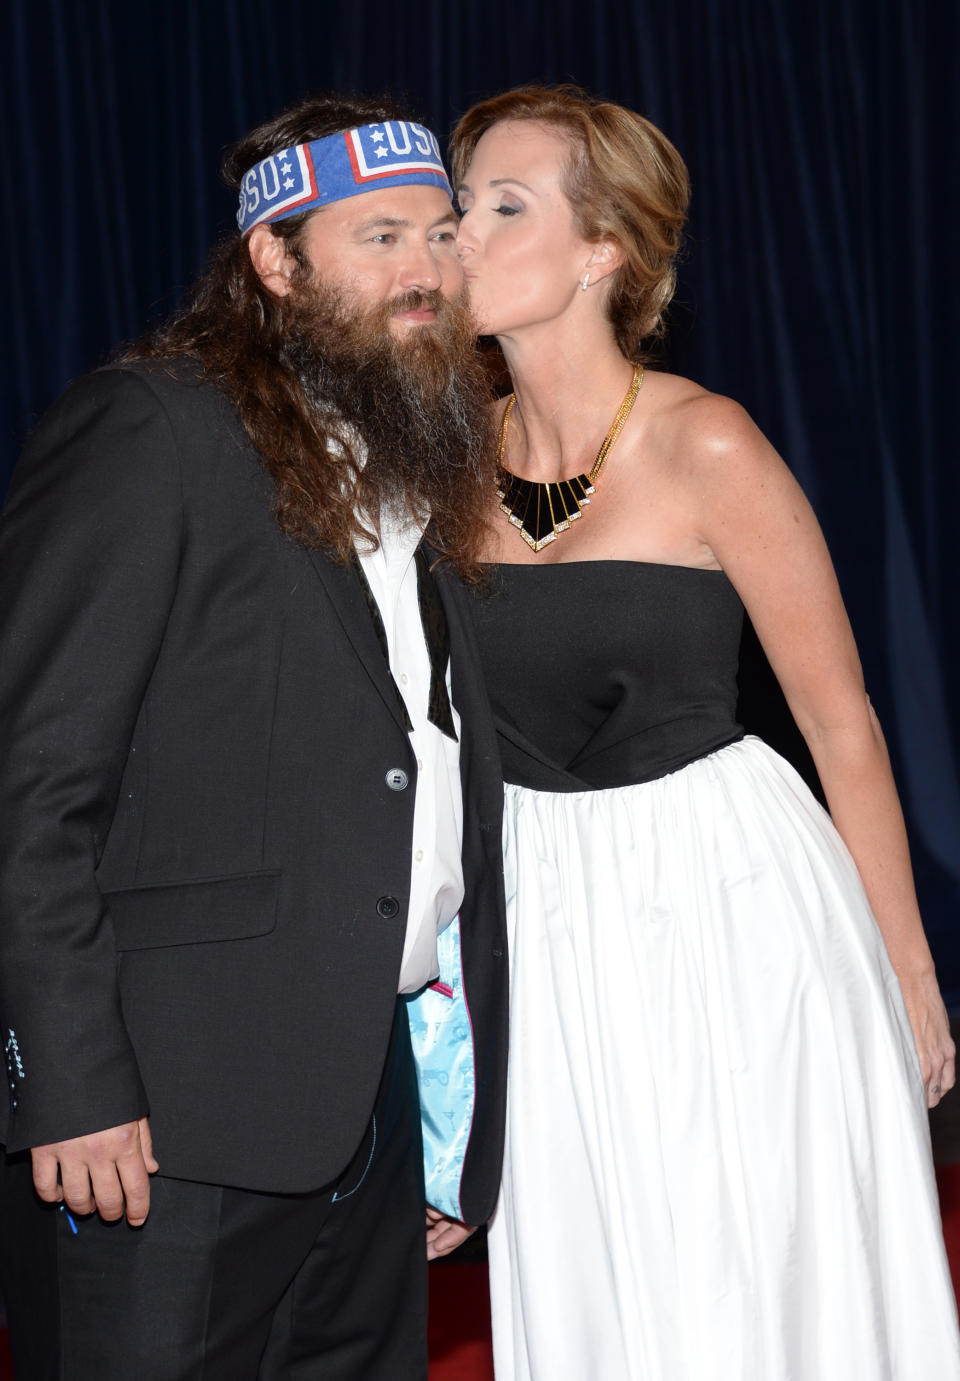 Willie Robertson, left, and Korie Robertson arrive at the White House Correspondents' Association Dinner at the Washington Hilton Hotel, Saturday, May 3, 2014, in Washington. (Photo by Evan Agostini/Invision/AP)